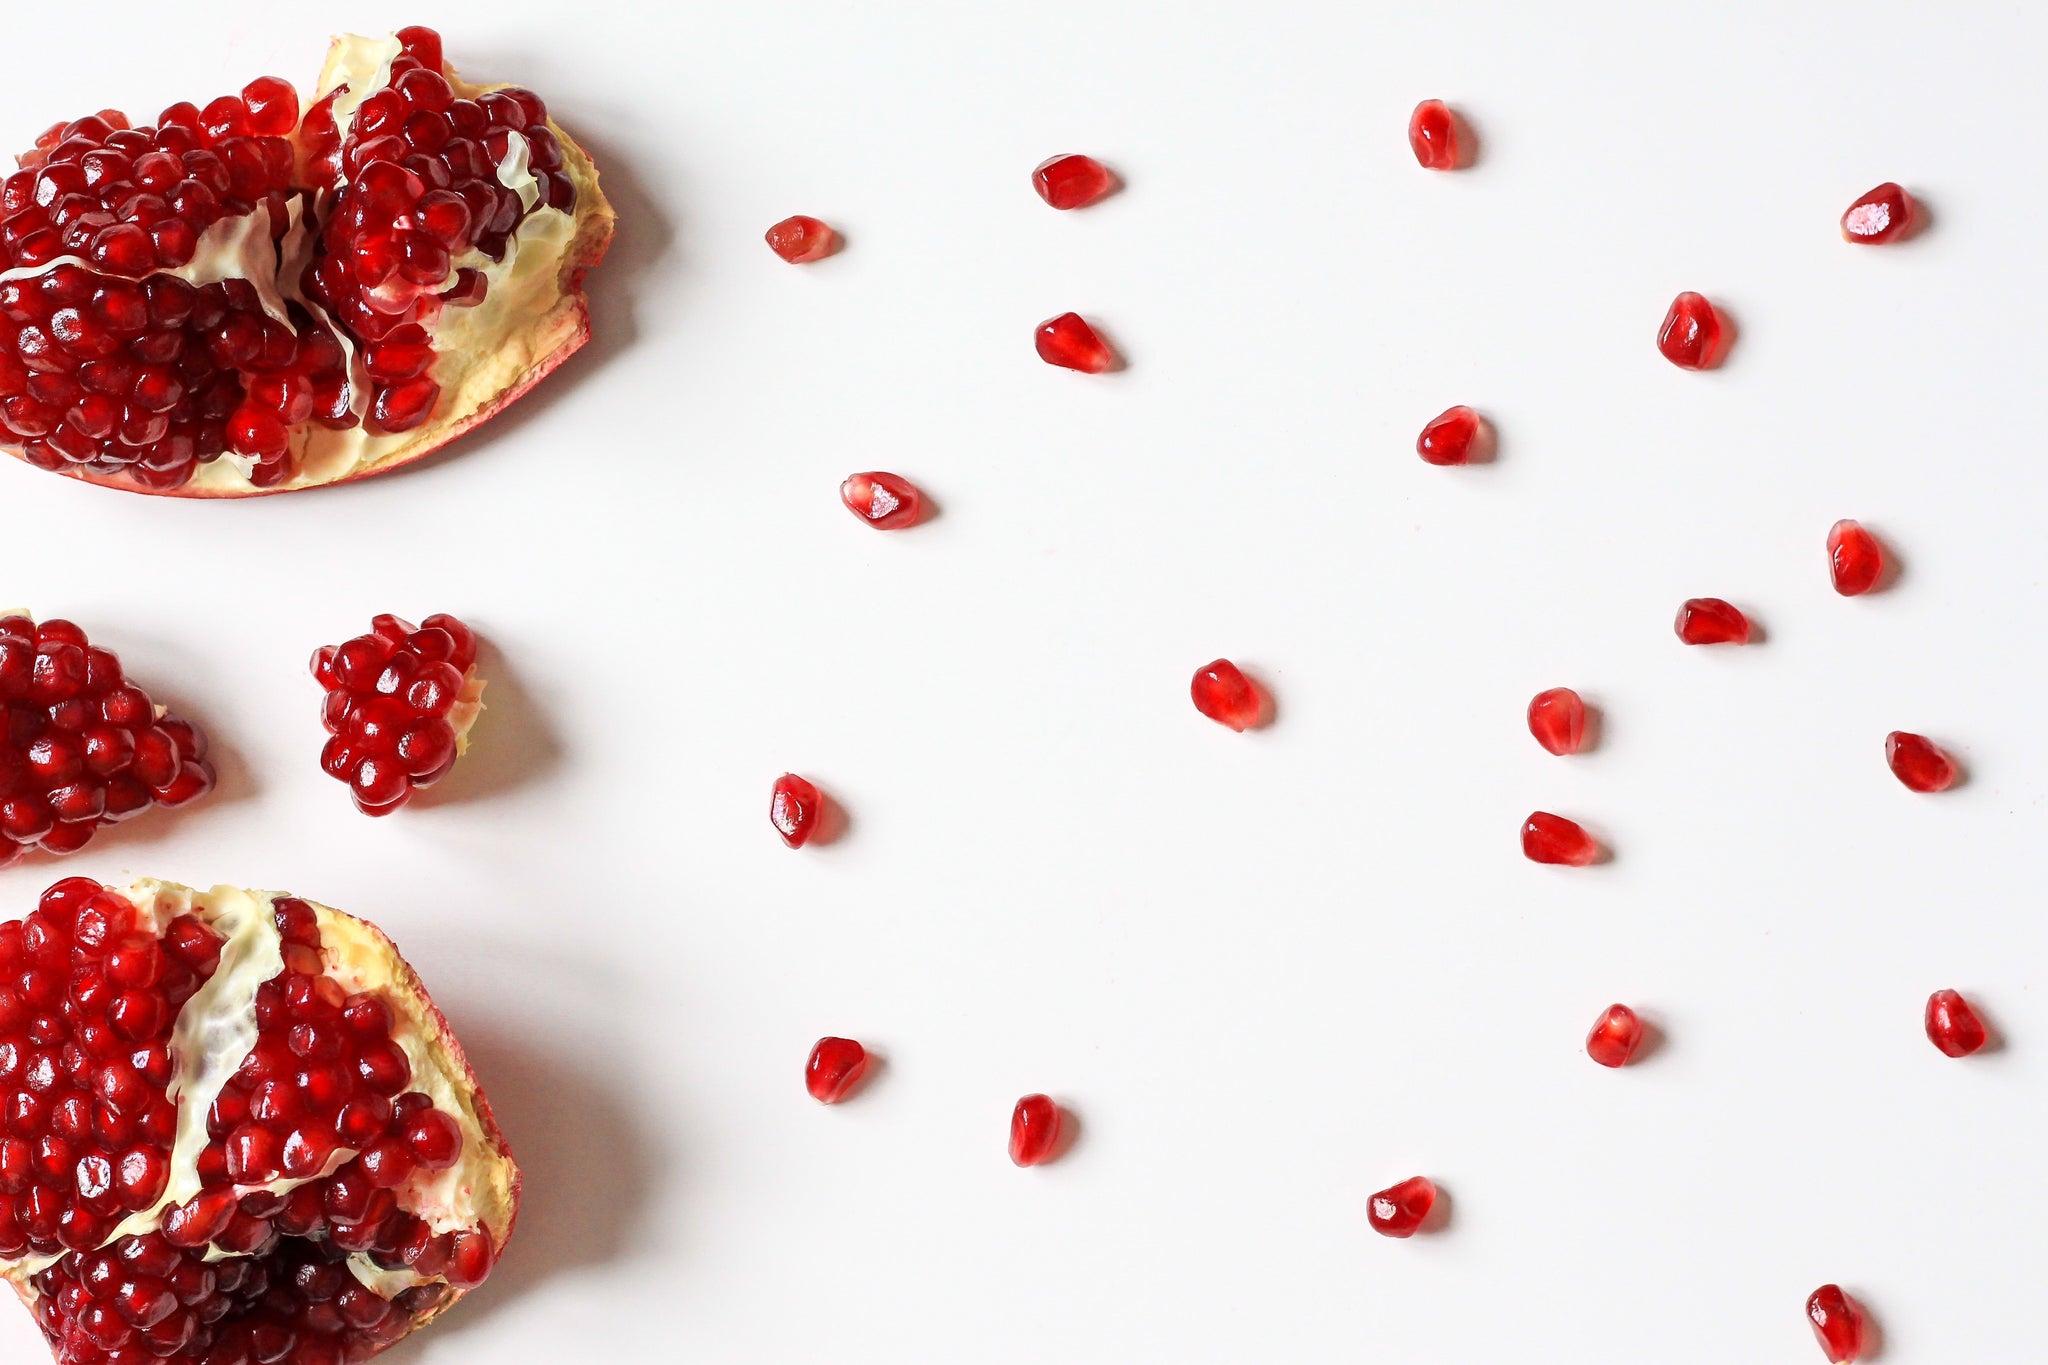 Superfood Spotlight on Pomegranate and What it Can Do For Your Skin